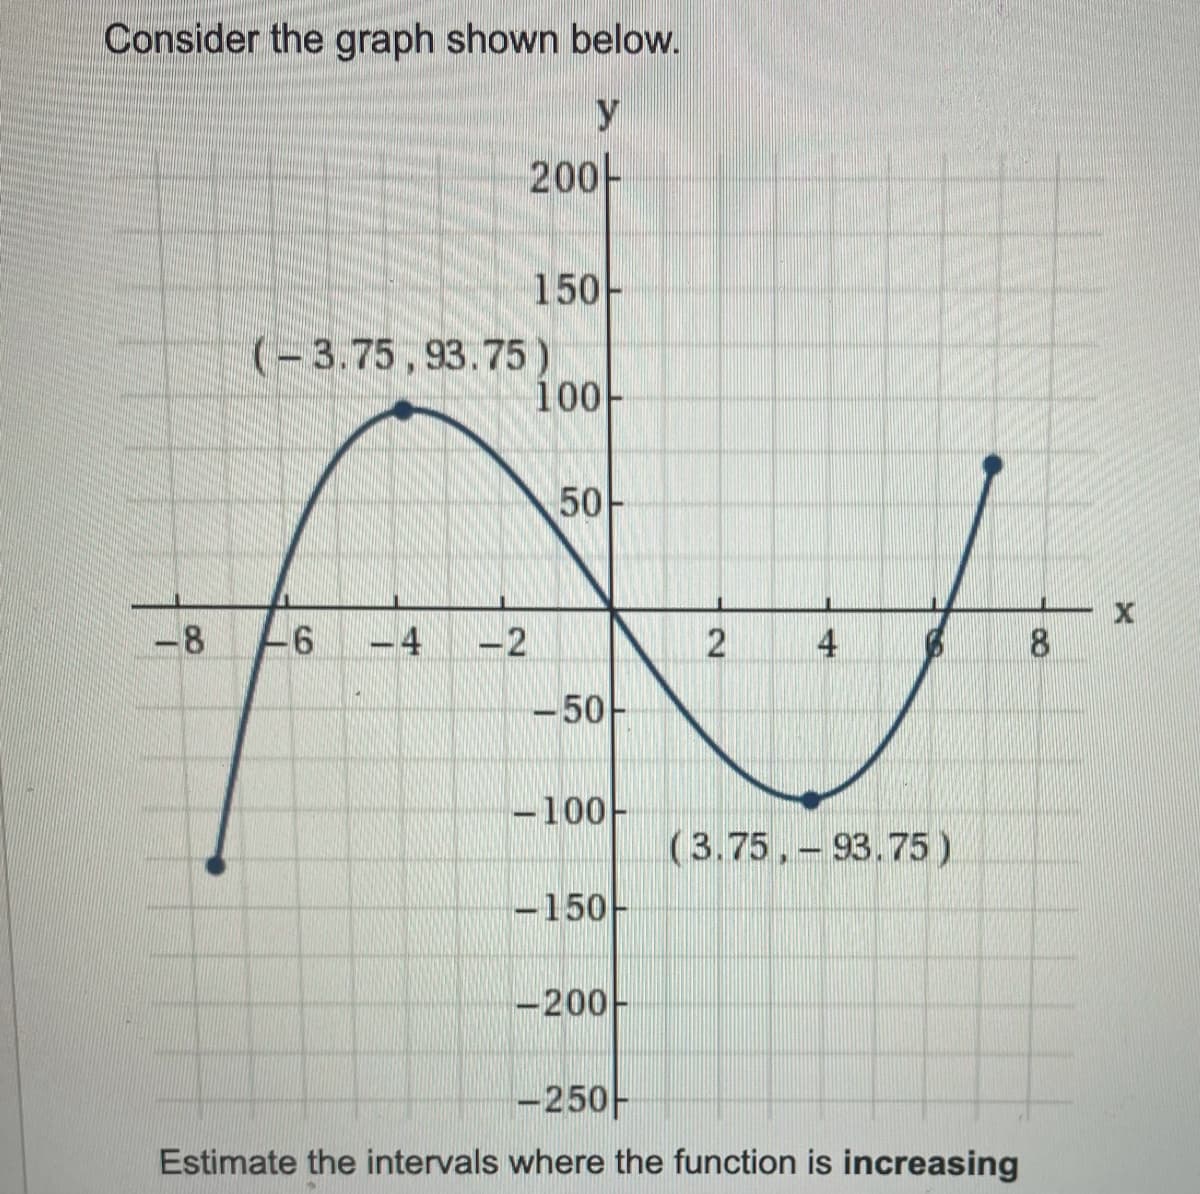 Consider the graph shown below.
y
-8
-6
200
(-3.75,93.75)
-4
150-
-2
100-
50
-50
-100-
-150-
-200-
2
(3.75,- 93.75)
-250-
Estimate the intervals where the function is increasing
8
X